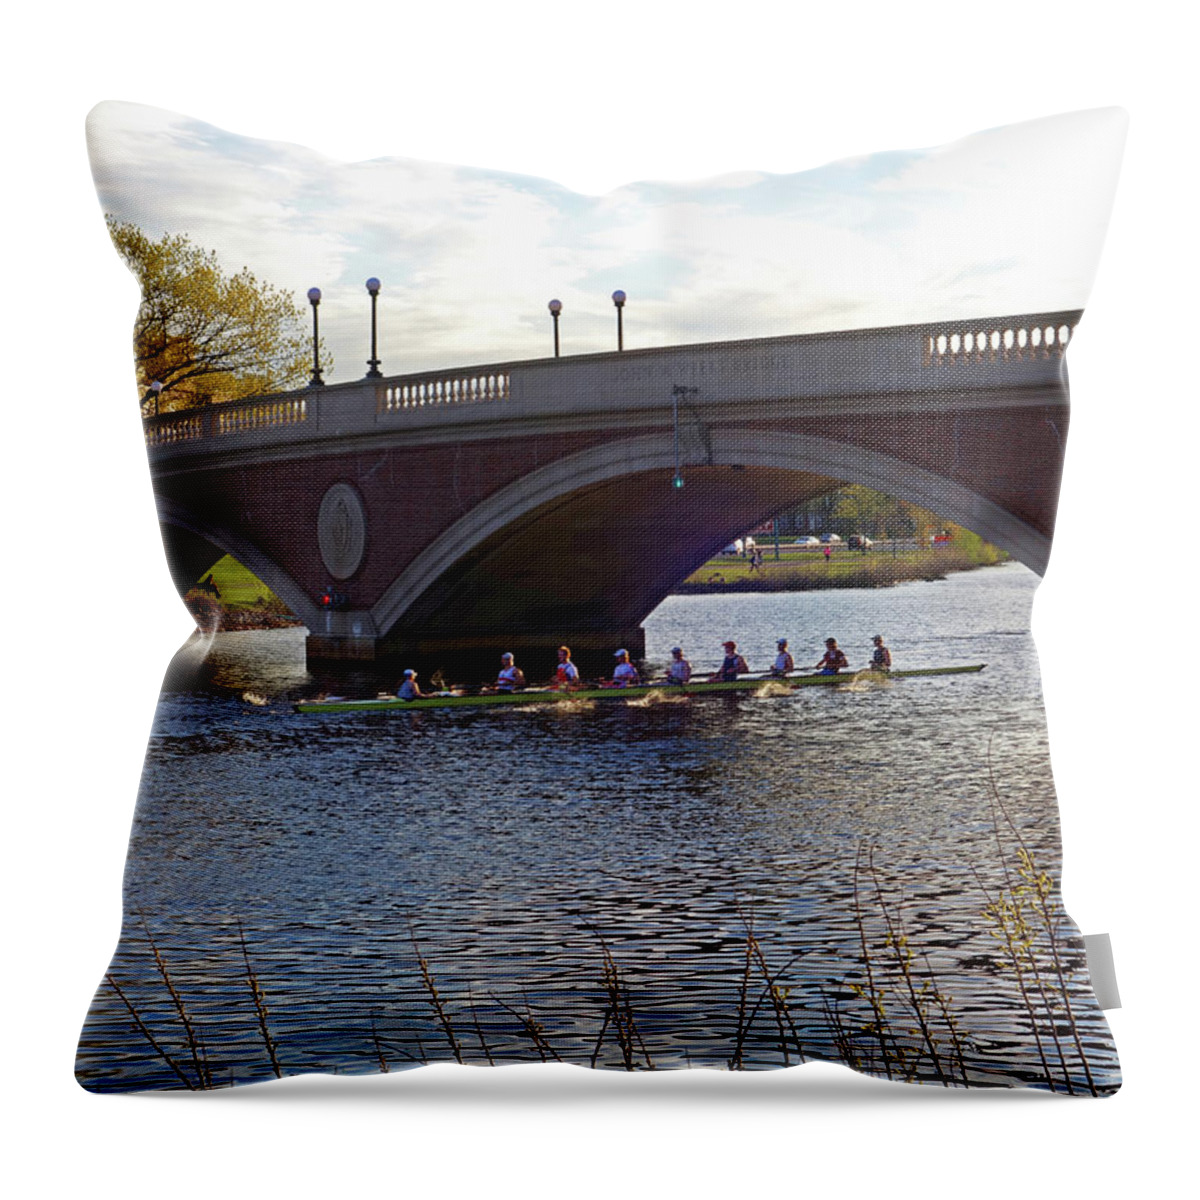 John Throw Pillow featuring the photograph John Weeks Bridge Harvard Square Chales River Sunset Rowers by Toby McGuire